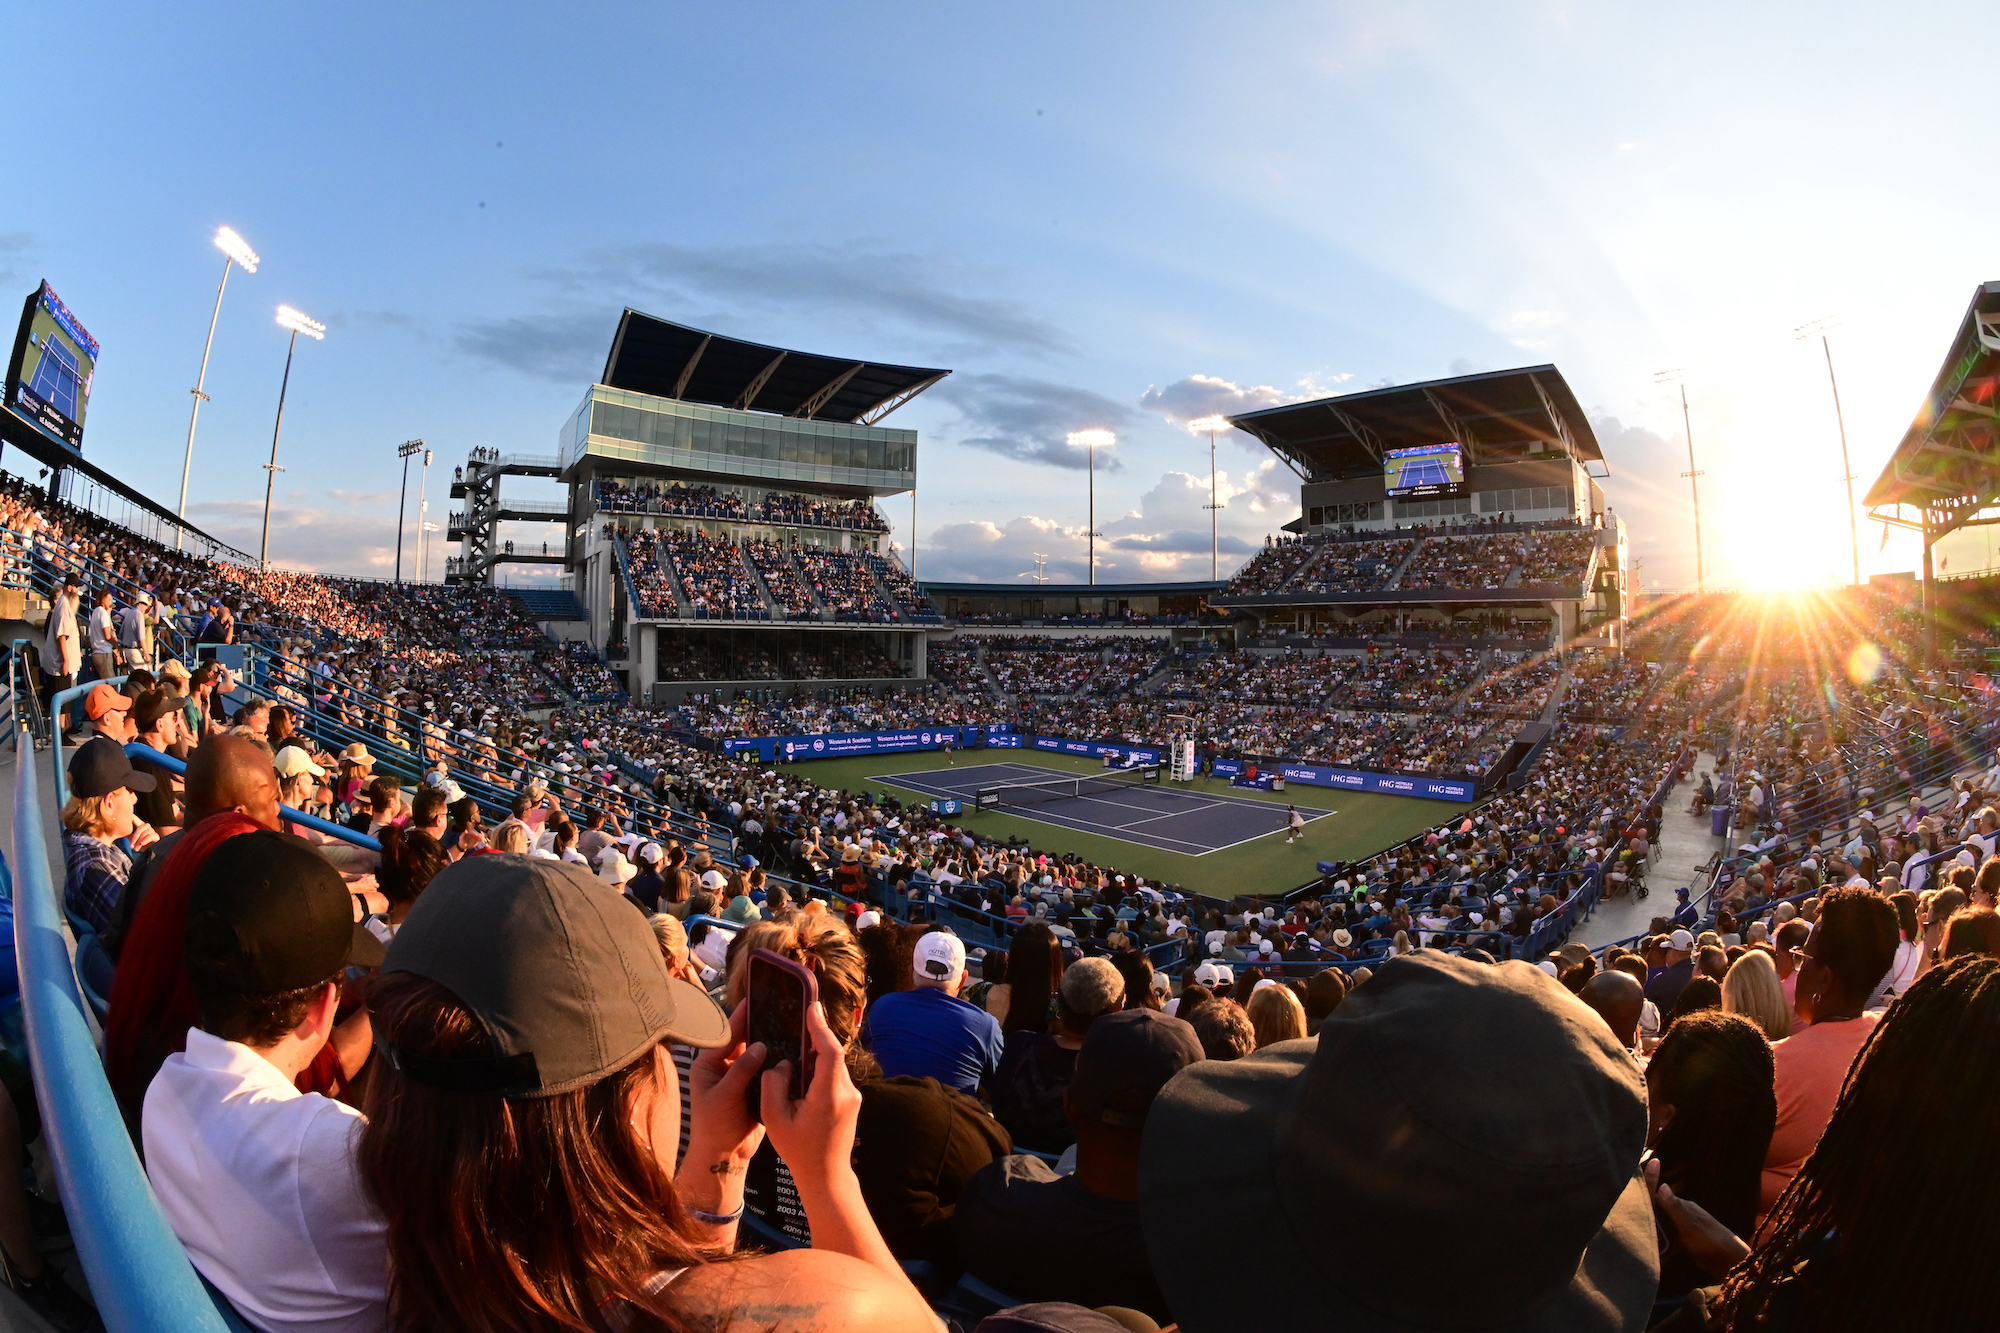 stadium at sunset with fans in the stands